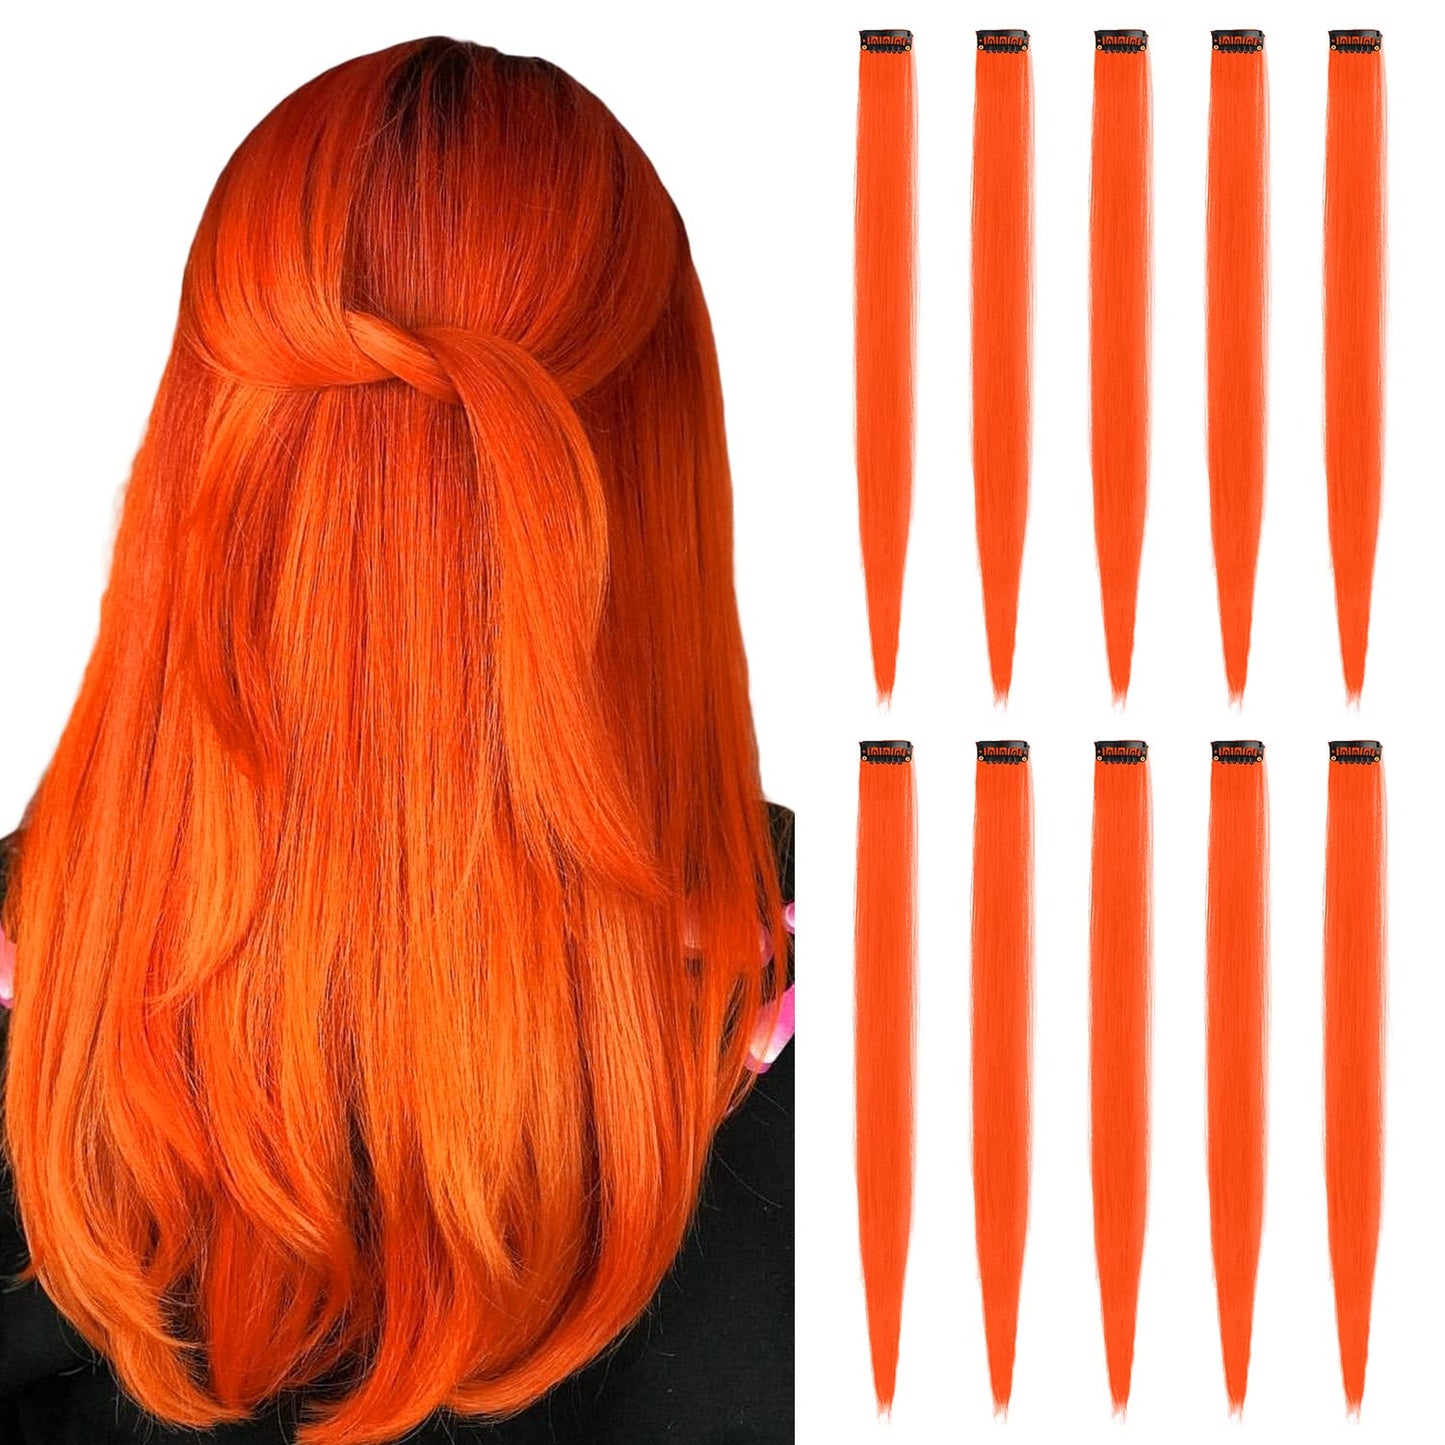 22 Inch Colored Hair Extensions (10 PCS Orange)